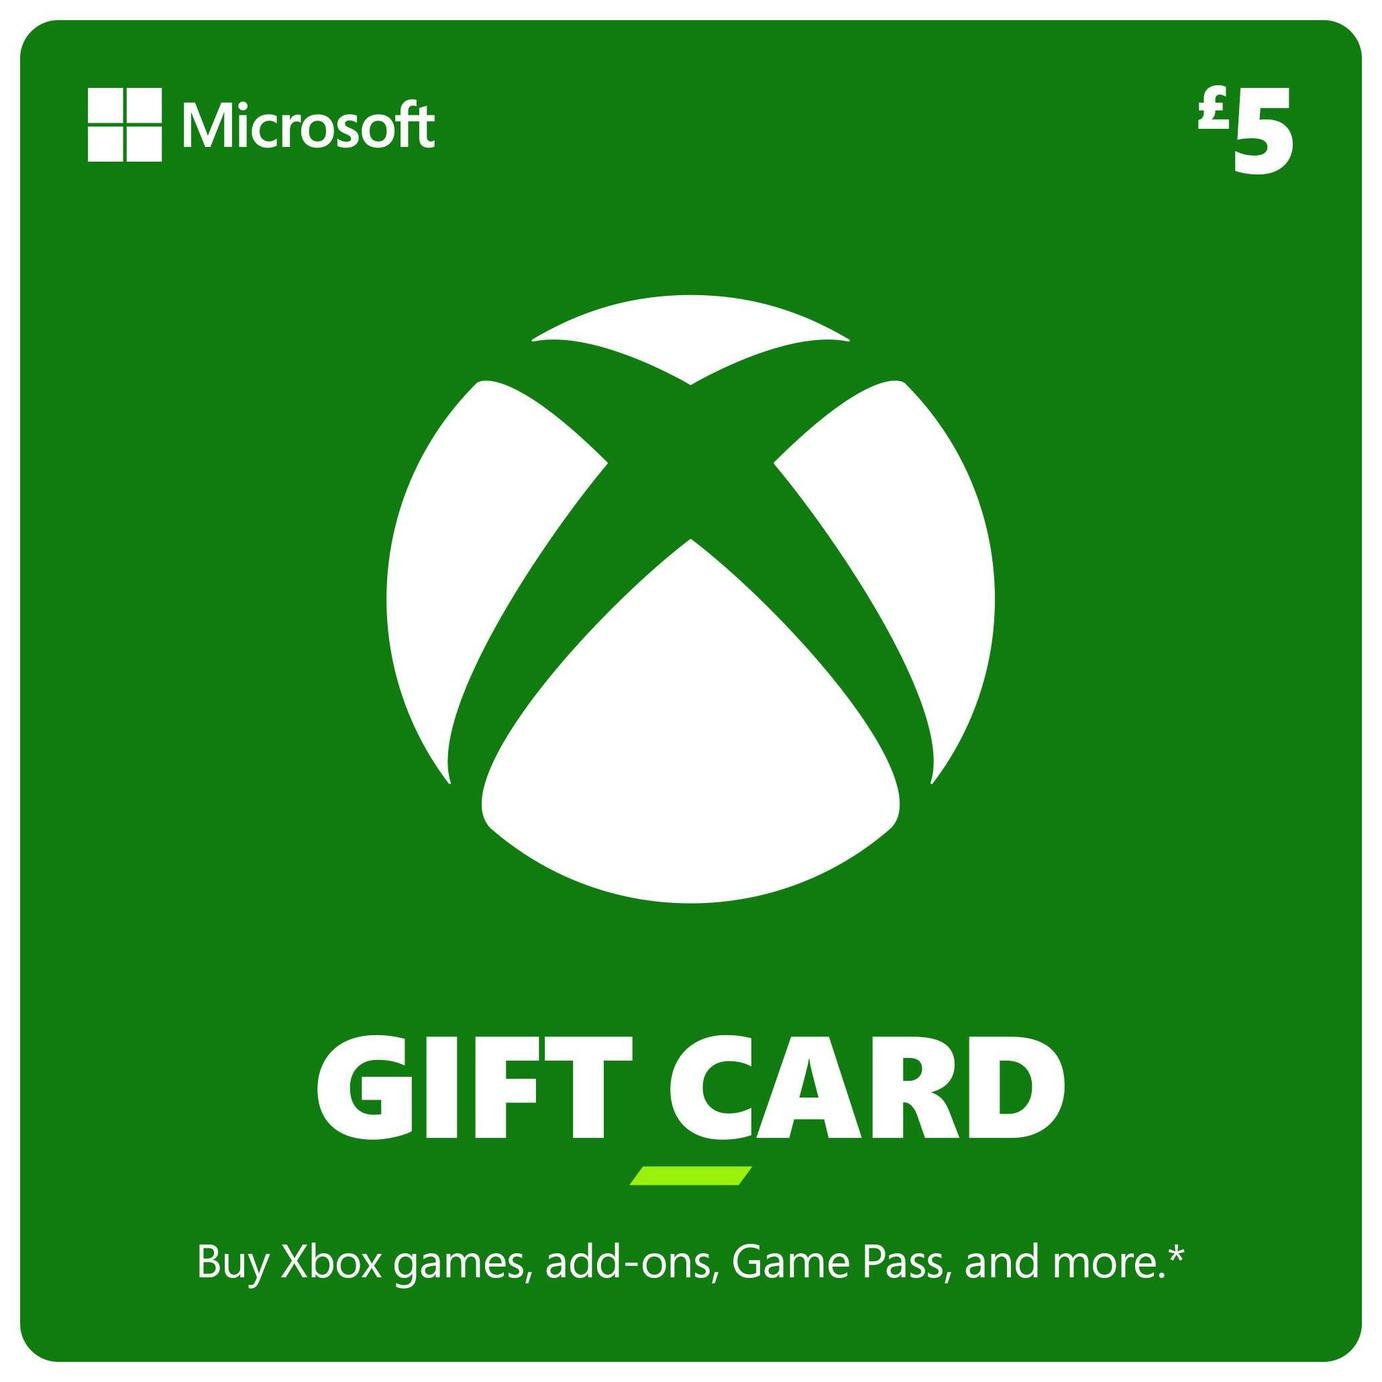 Xbox Live 5 GBP Gift Card